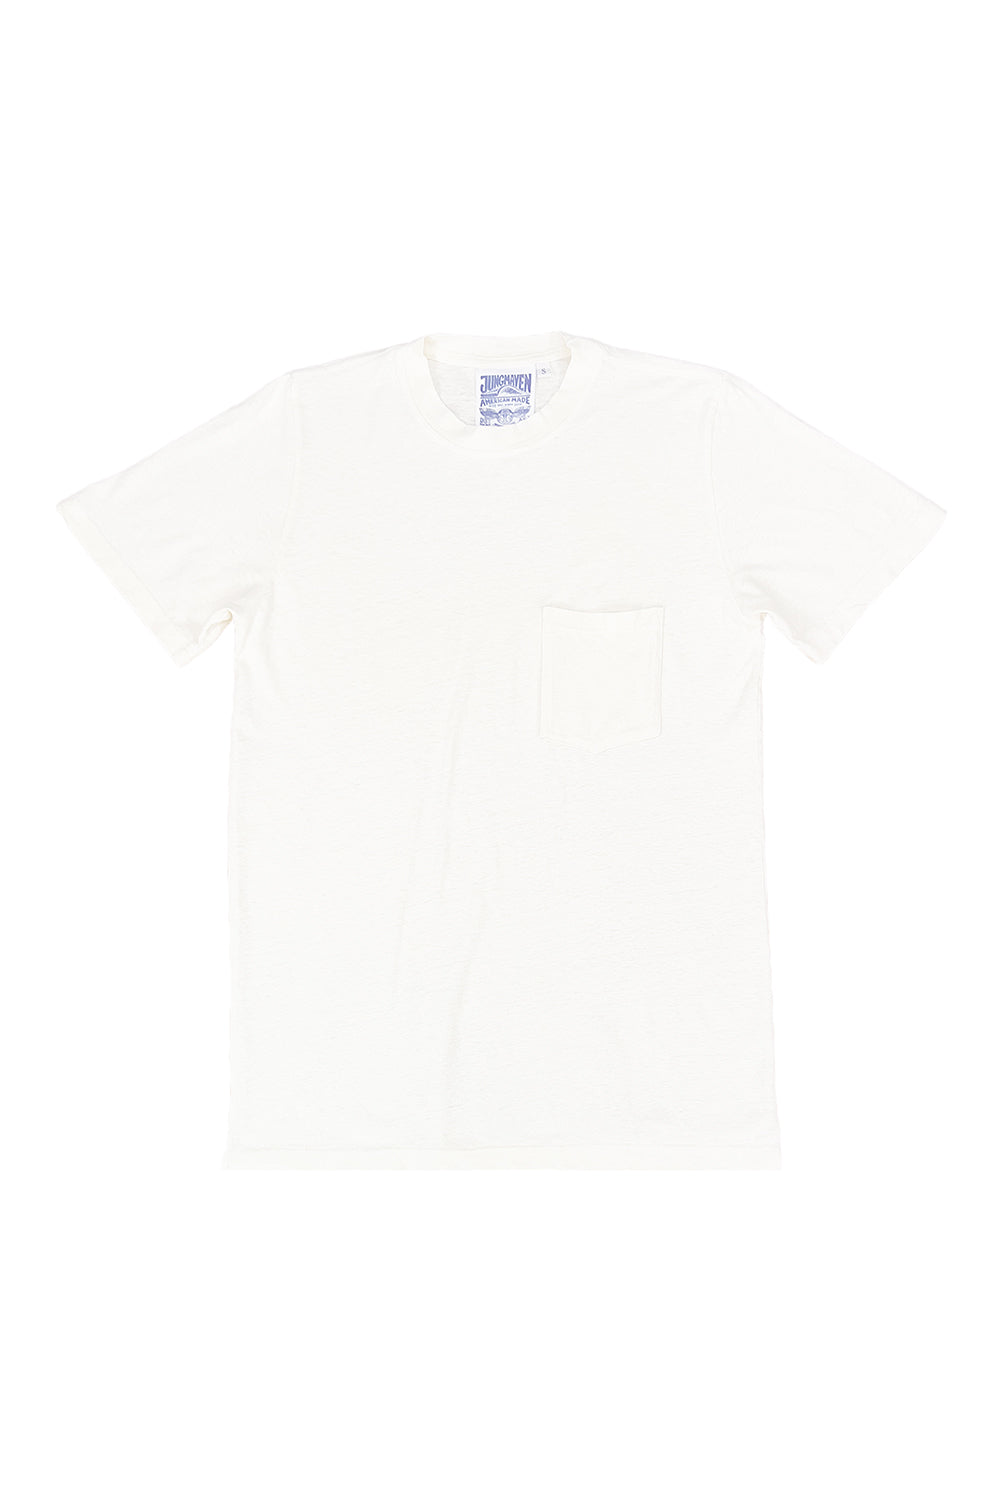 Jung Pocket Tee | Jungmaven Hemp Clothing & Accessories / Color: Washed White